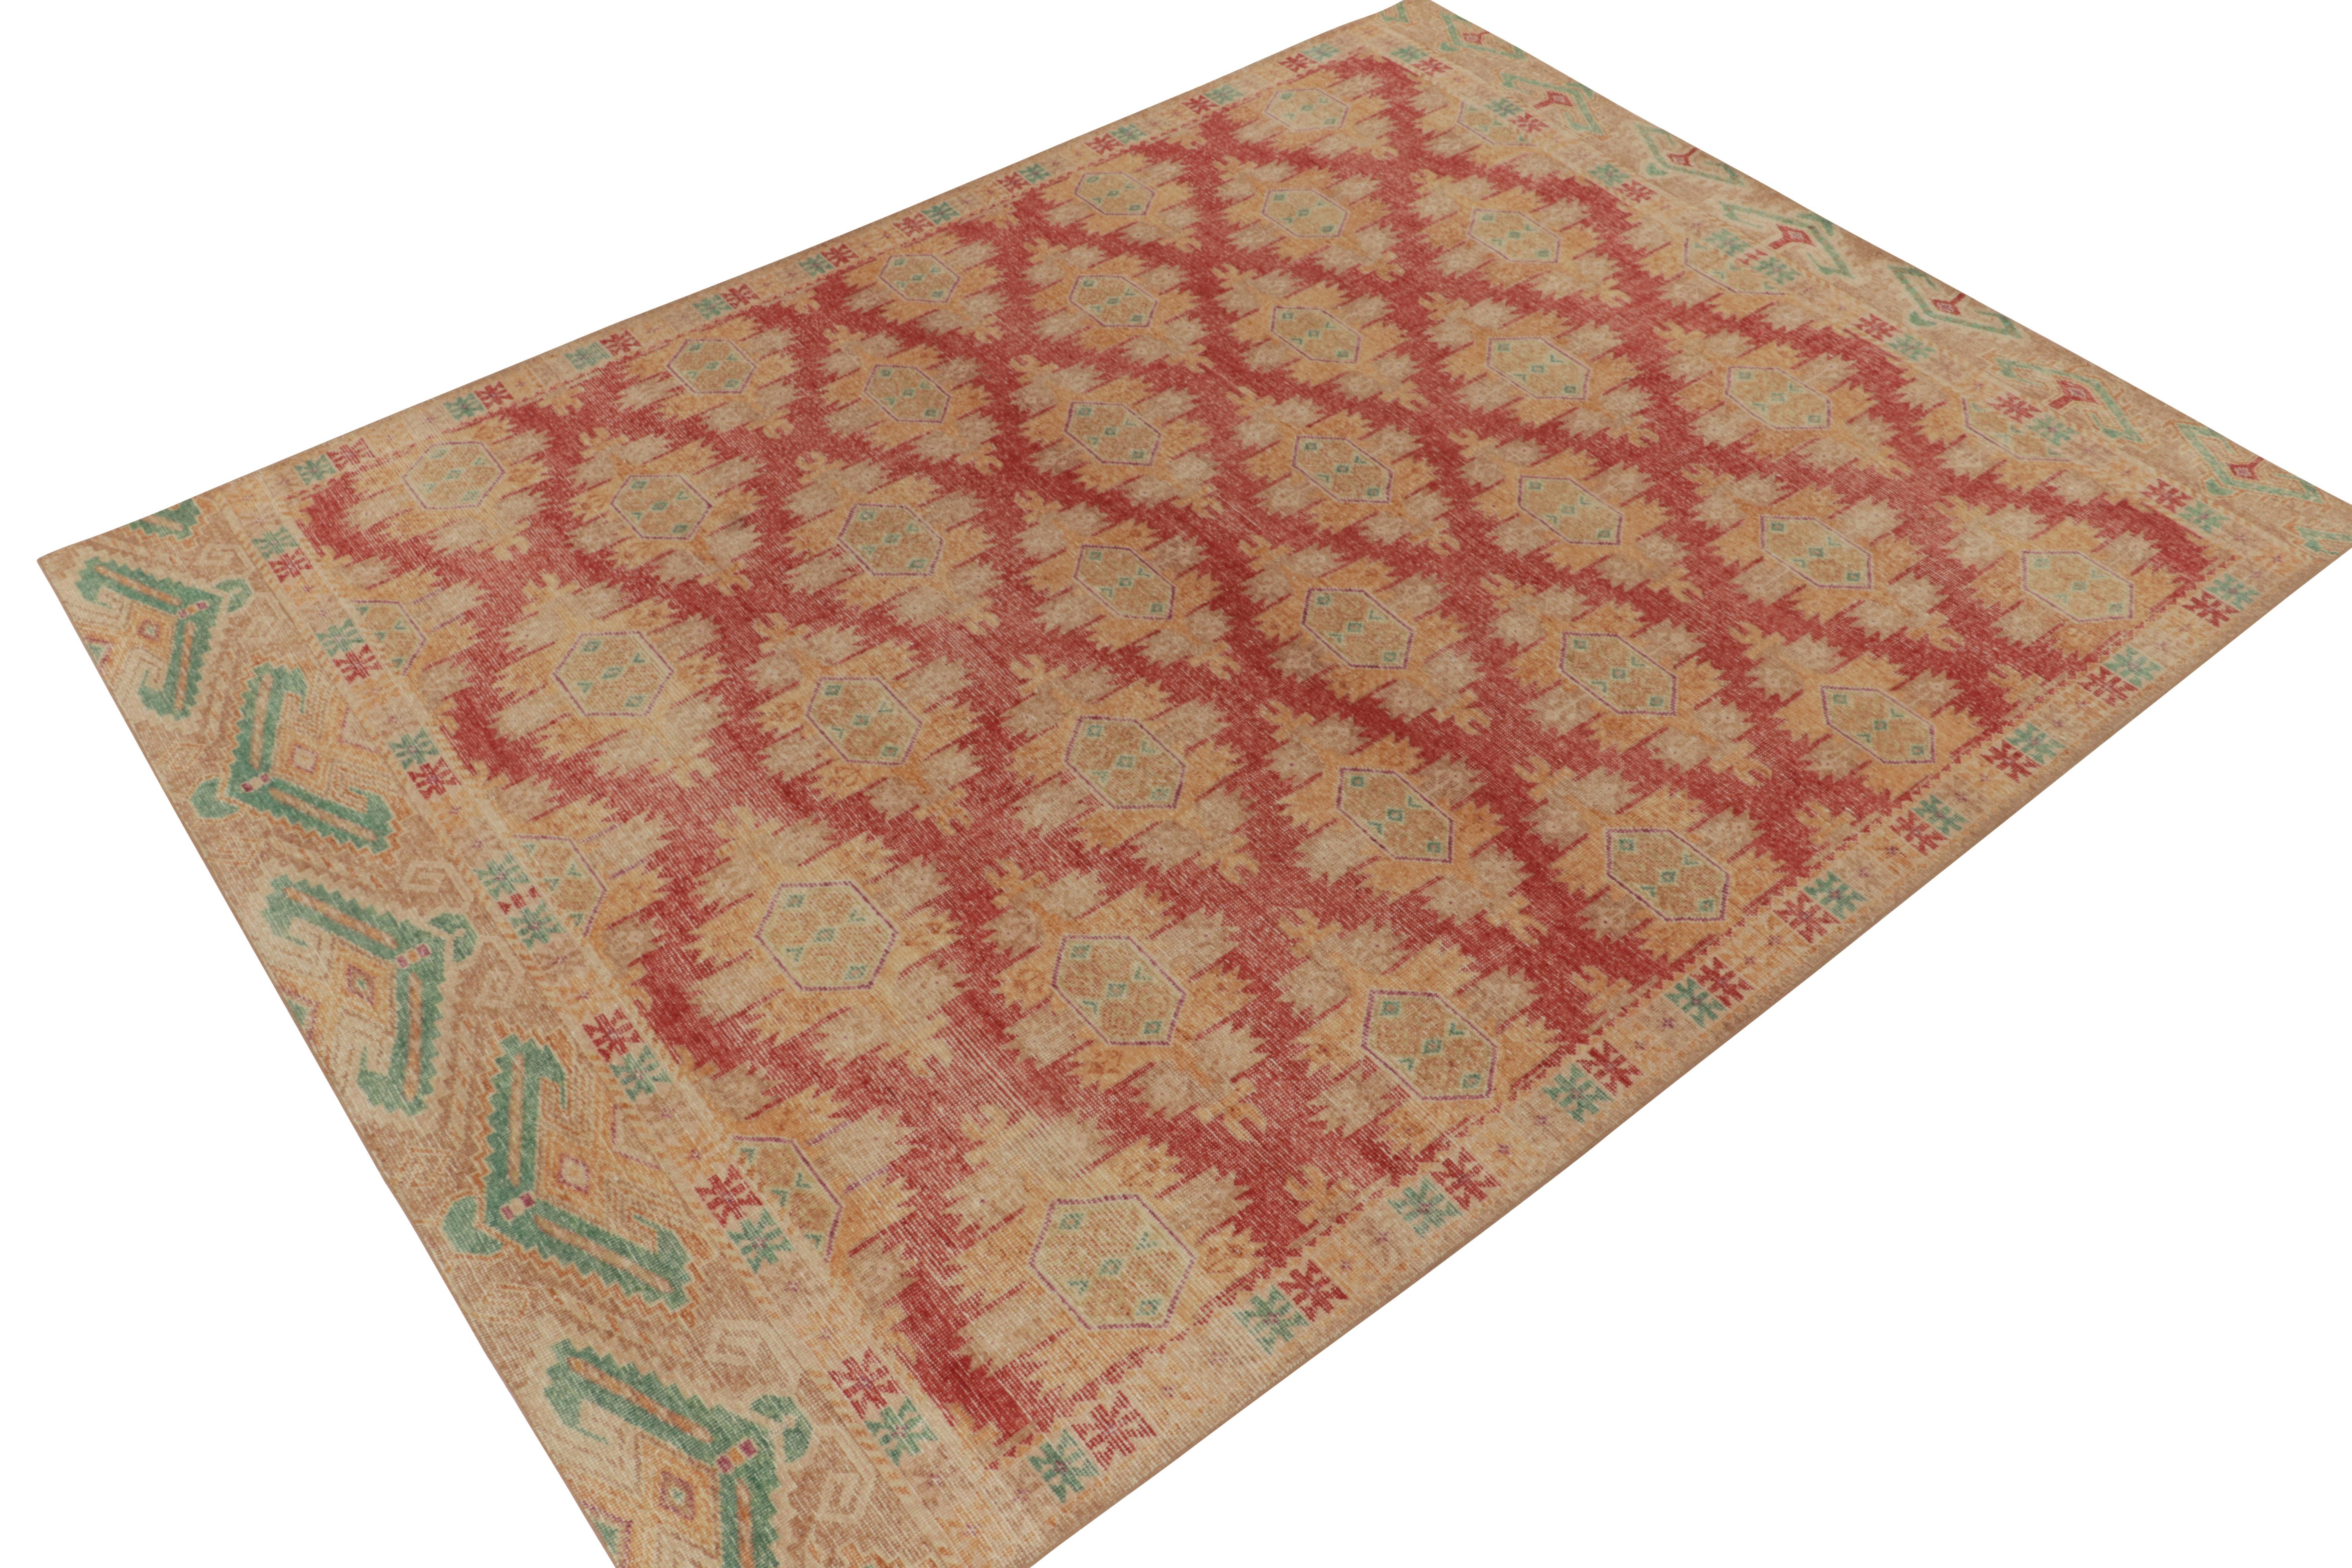 From Rug & Kilim’s Homage Collection, this 9x12 hand-knotted wool rug recaptures the aesthetics of turn-of-the-century antique Bokhara rugs; a celebrated caucasian tribal provenance revered for lively hues and graphic geometric patterns.

The